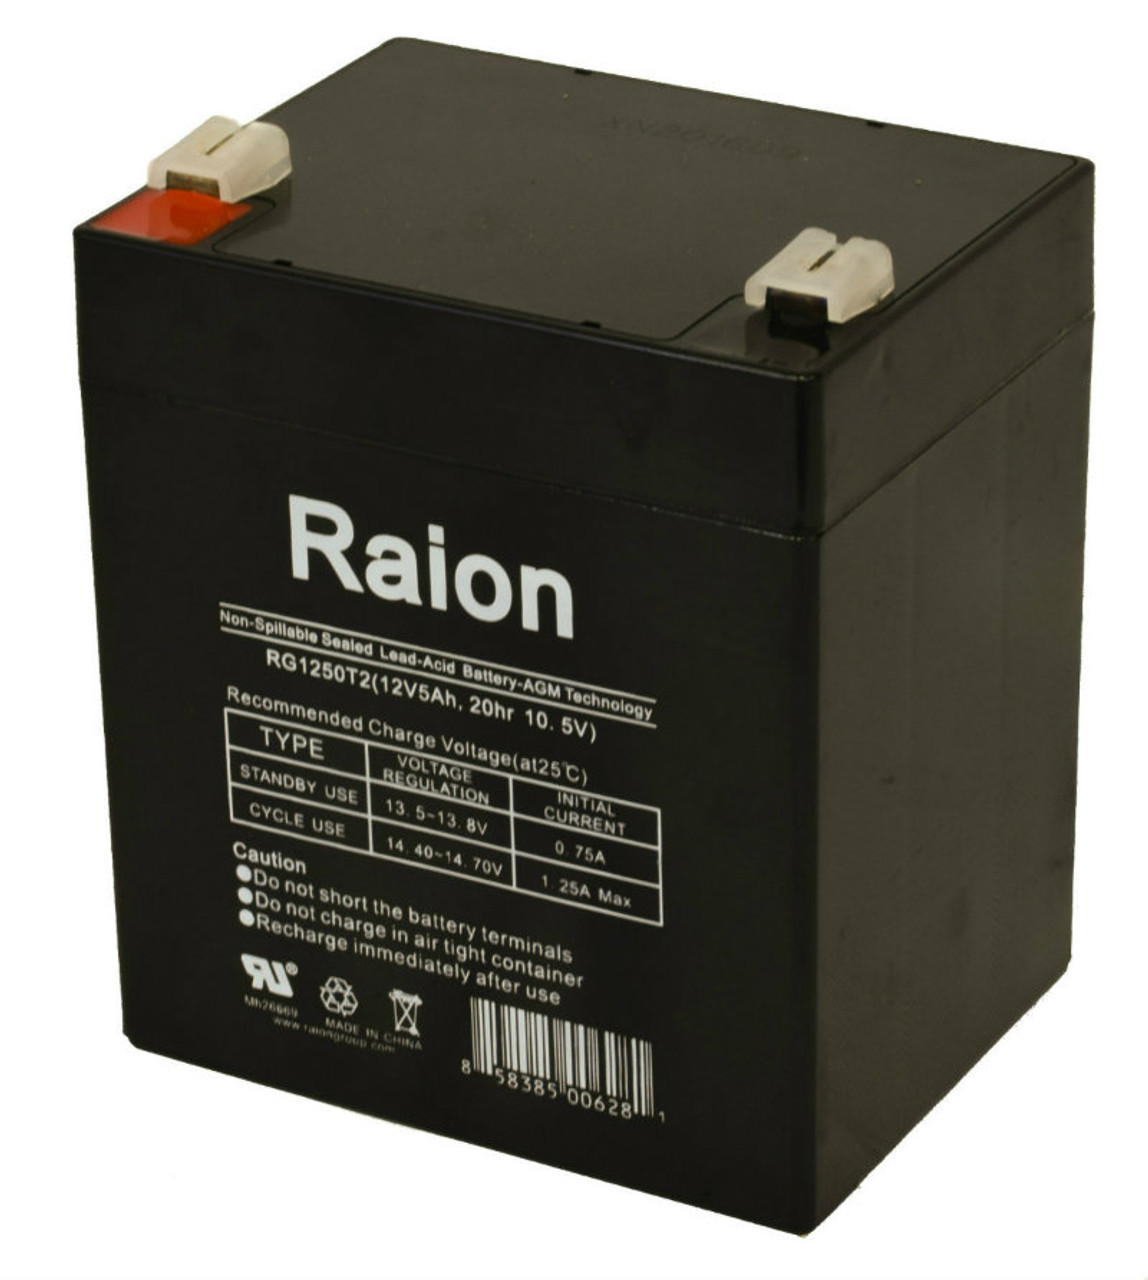 Raion Power RG1250T1 Replacement Battery for HRX 12-4